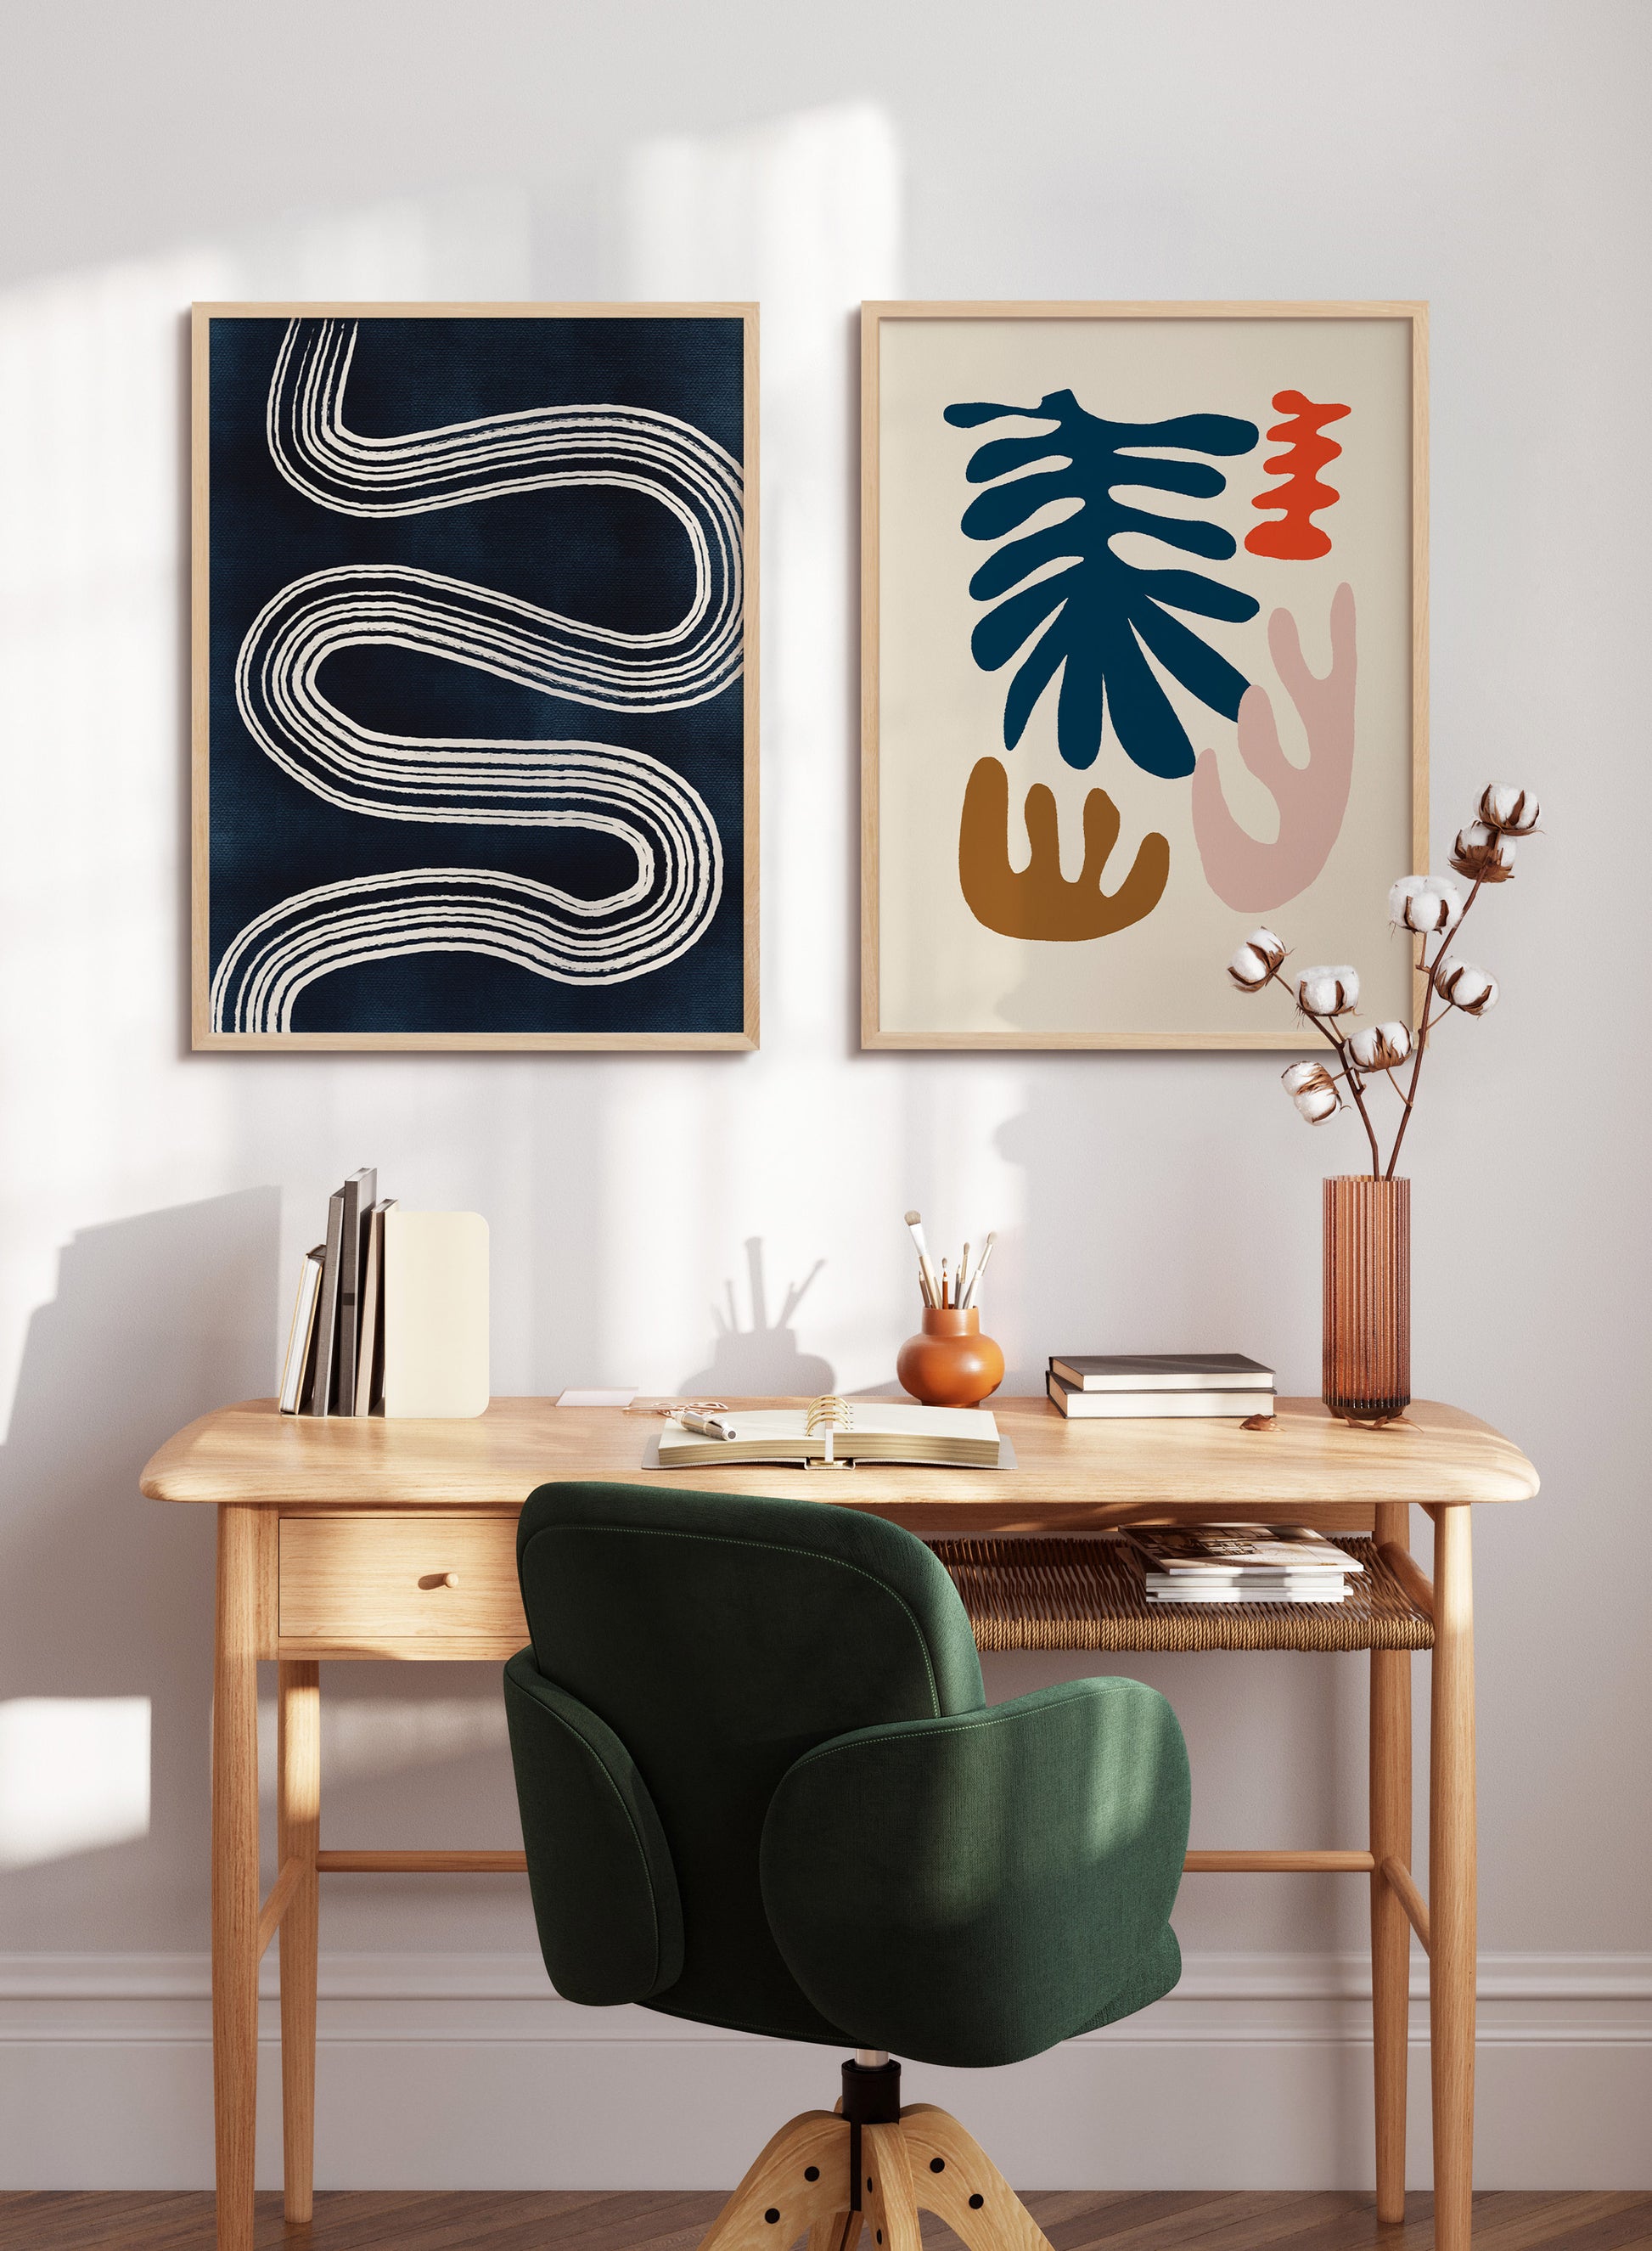 Meander | Shop Posters & Prints Online at Opposite Wall